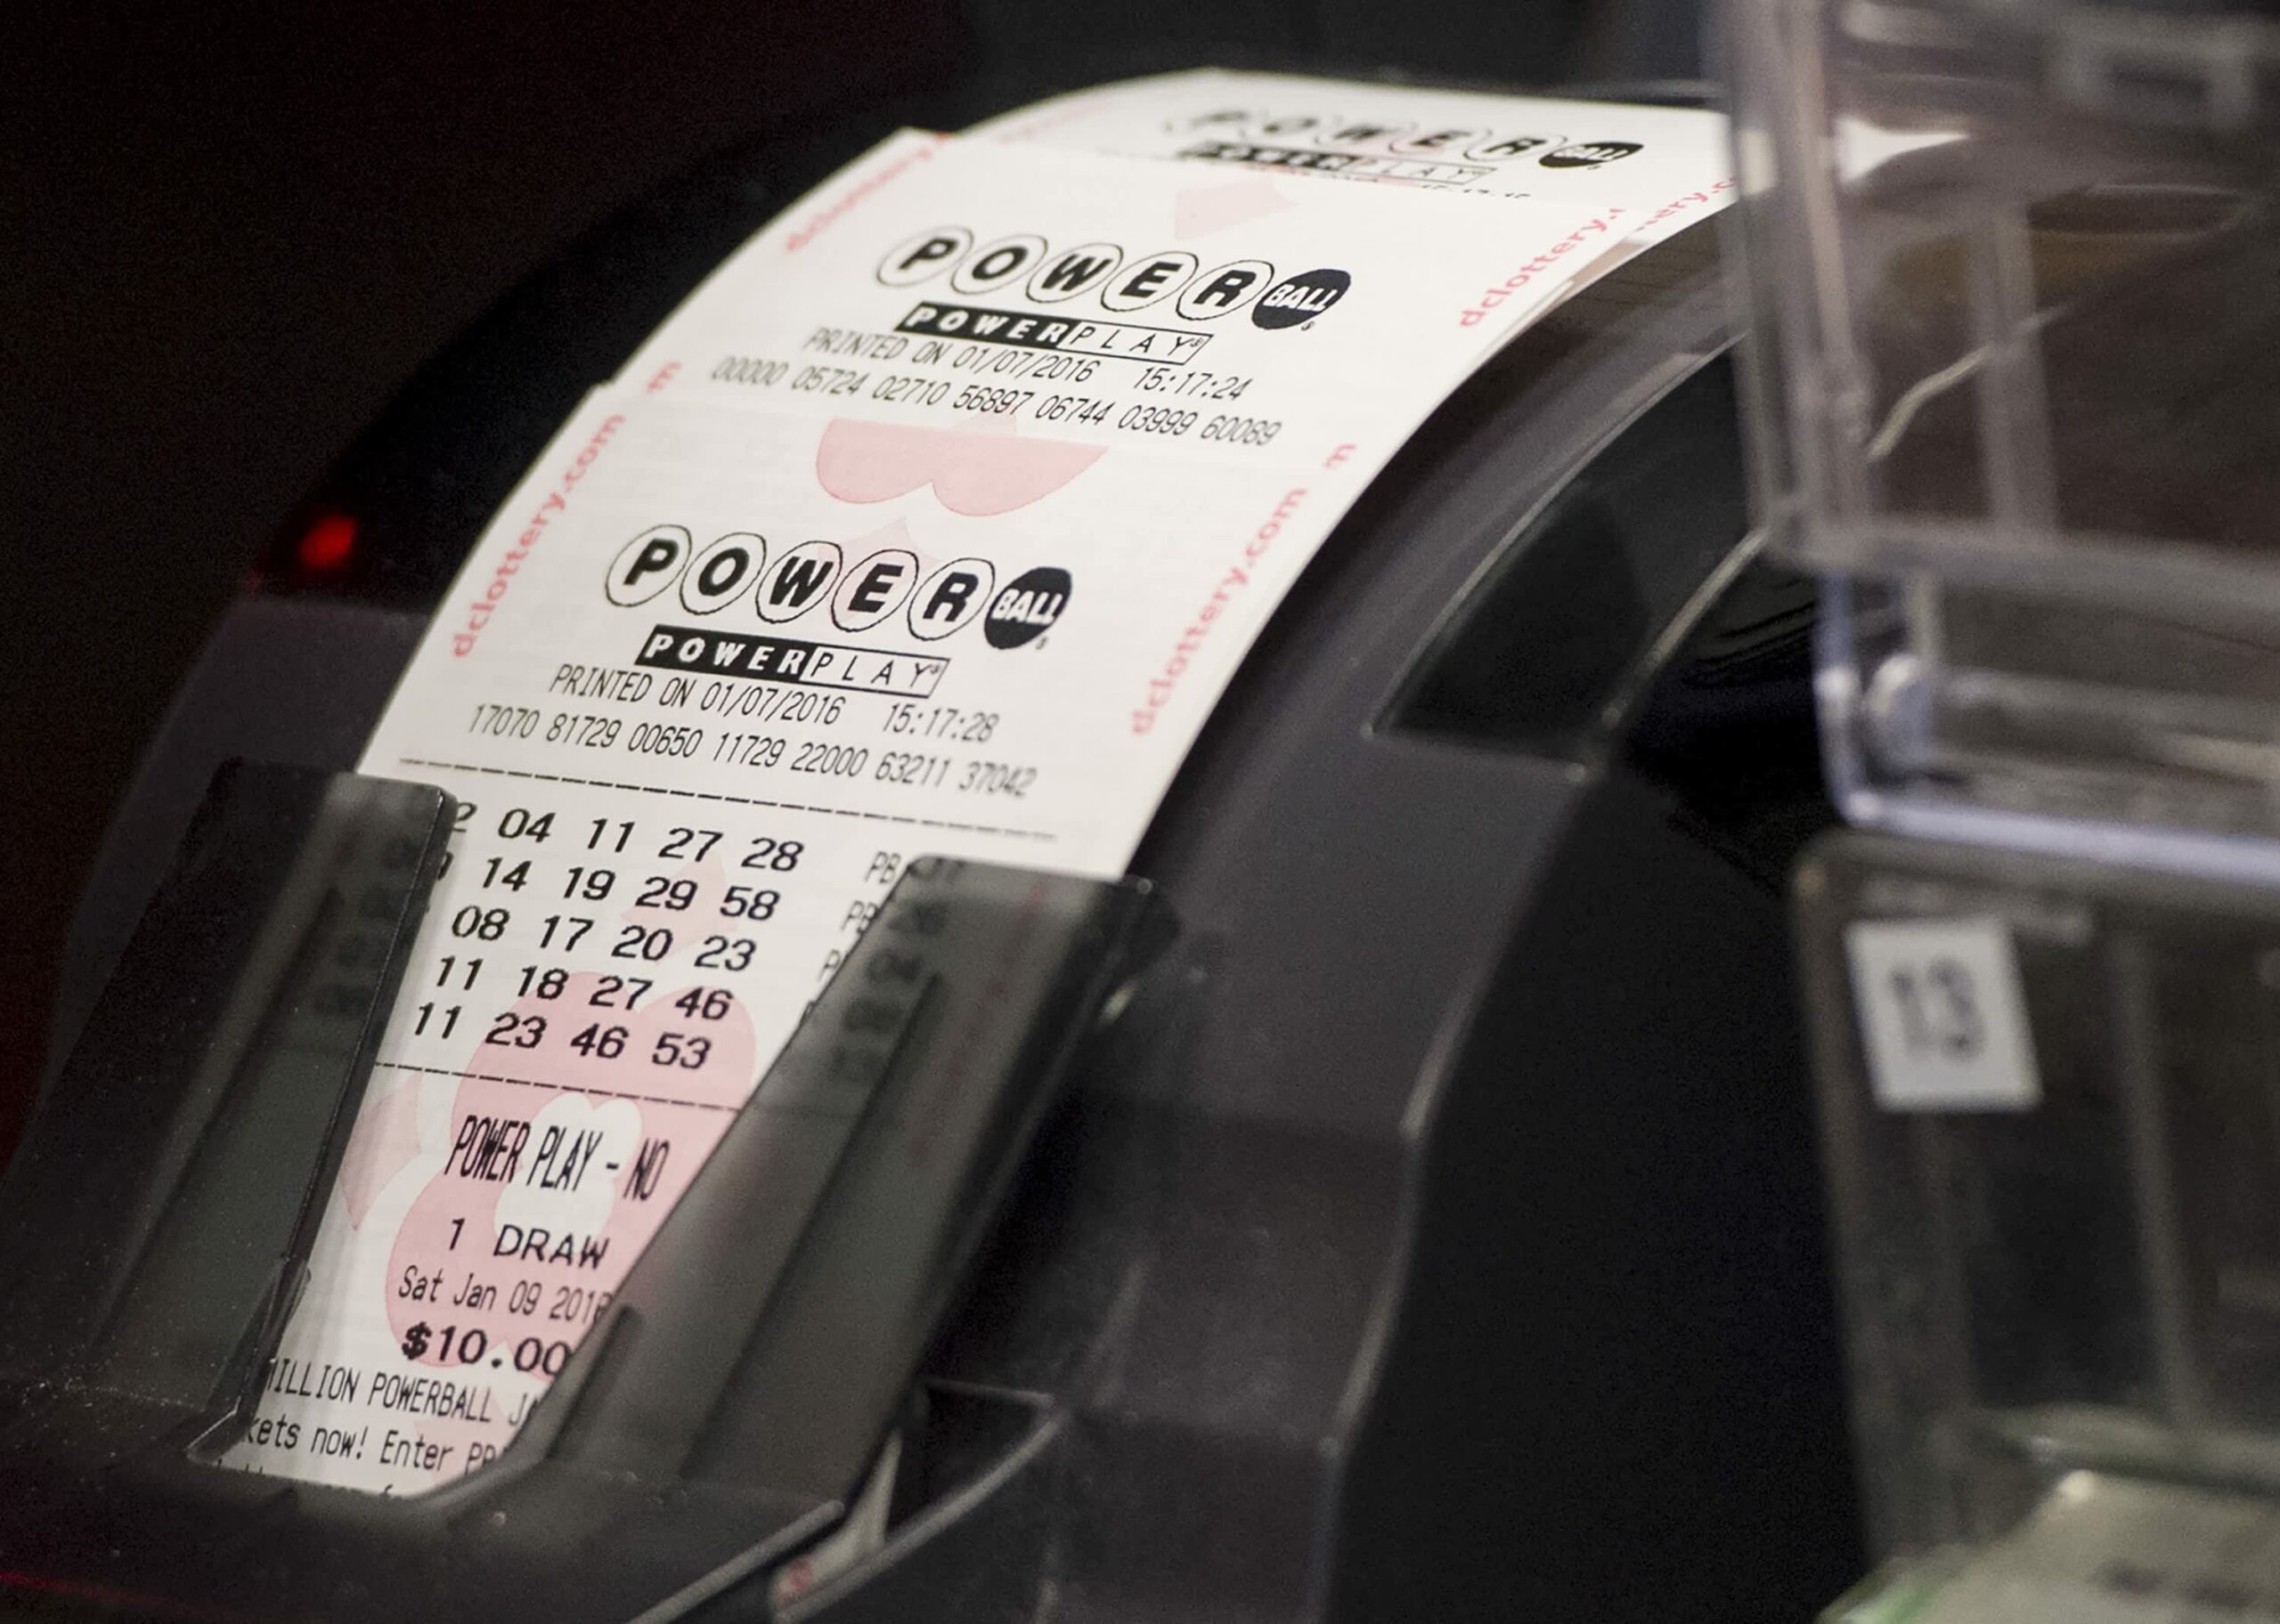 Powerball’s top prize is $483 million. This year, $2 billion was won